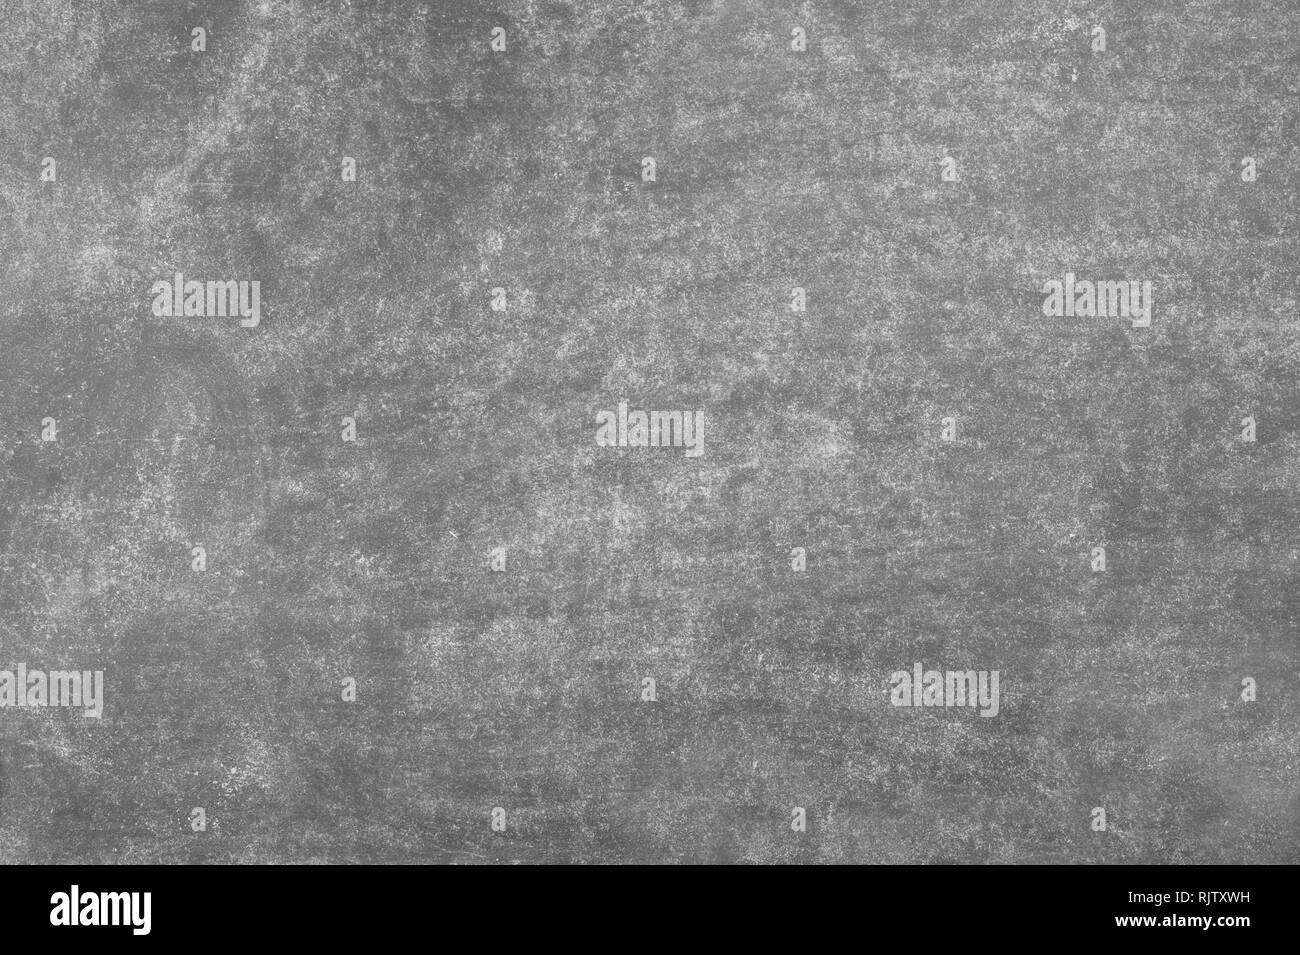 Detailed grunge texture background. Black blackboard. Design rubbed out dirty chalkboard. Texture, may use as background or banner with space for text. Stock Photo